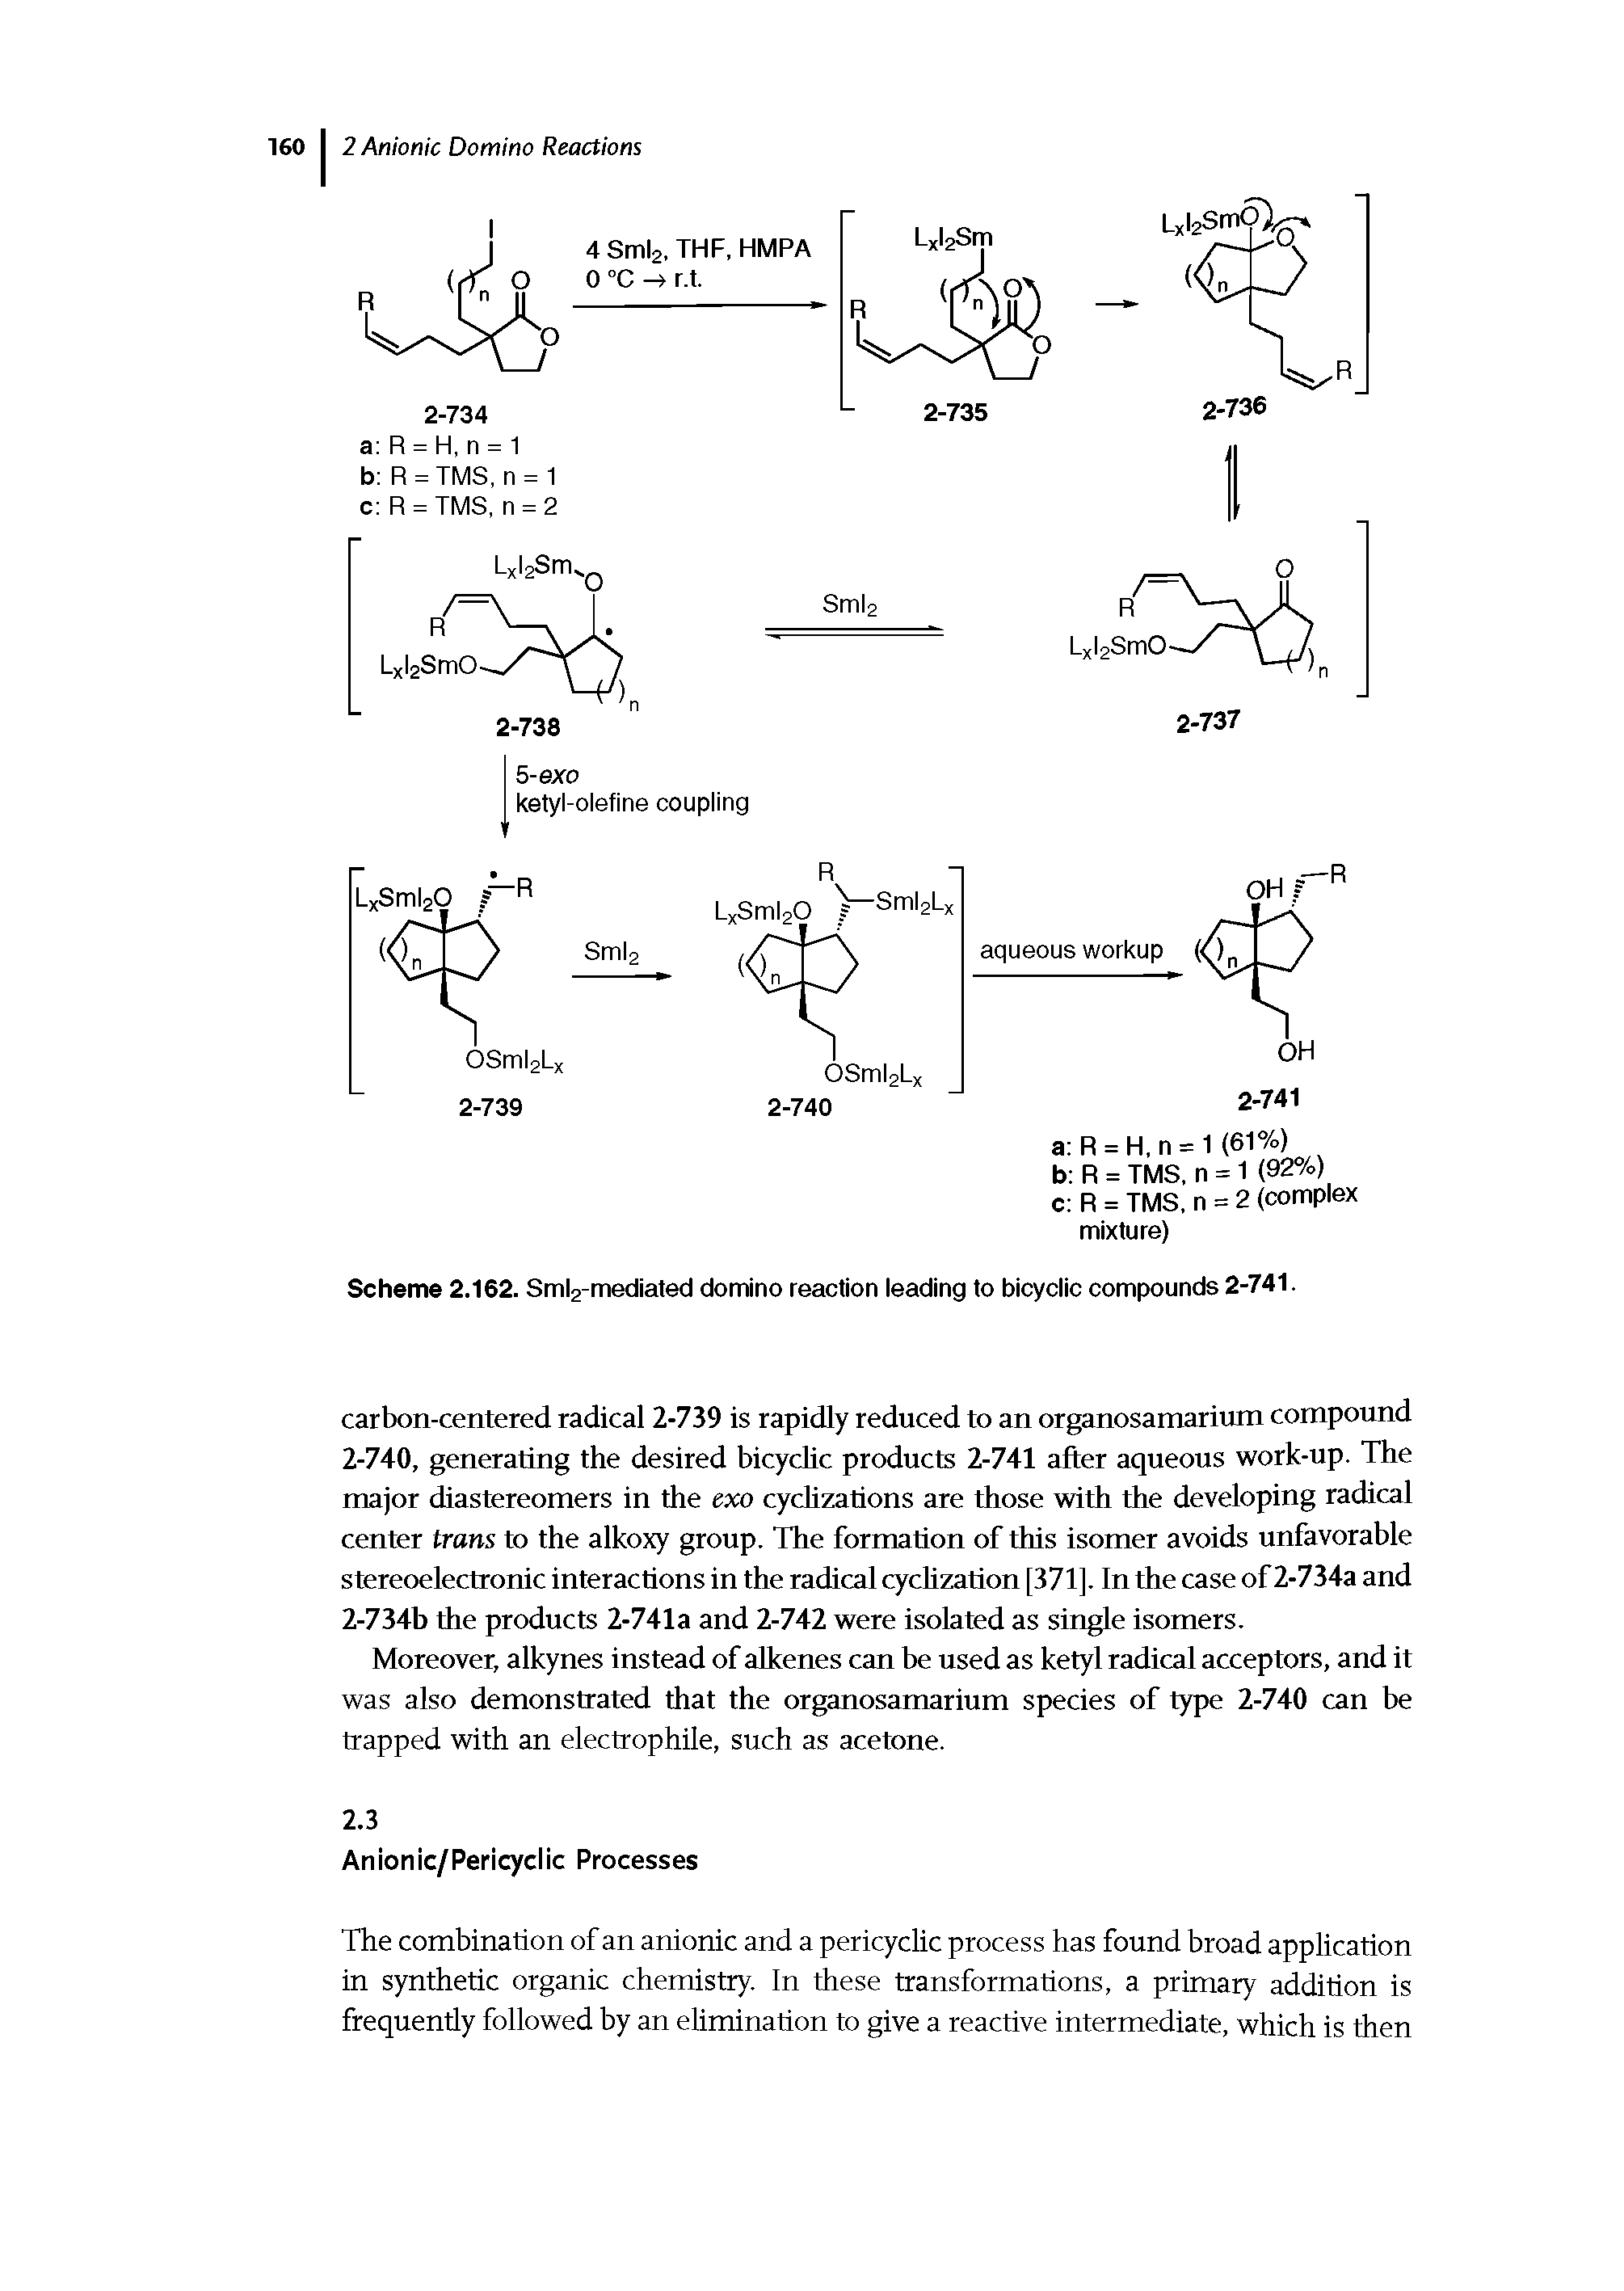 Scheme 2.162. Sml2-mediated domino reaction leading to bicyclic compounds 2-741.